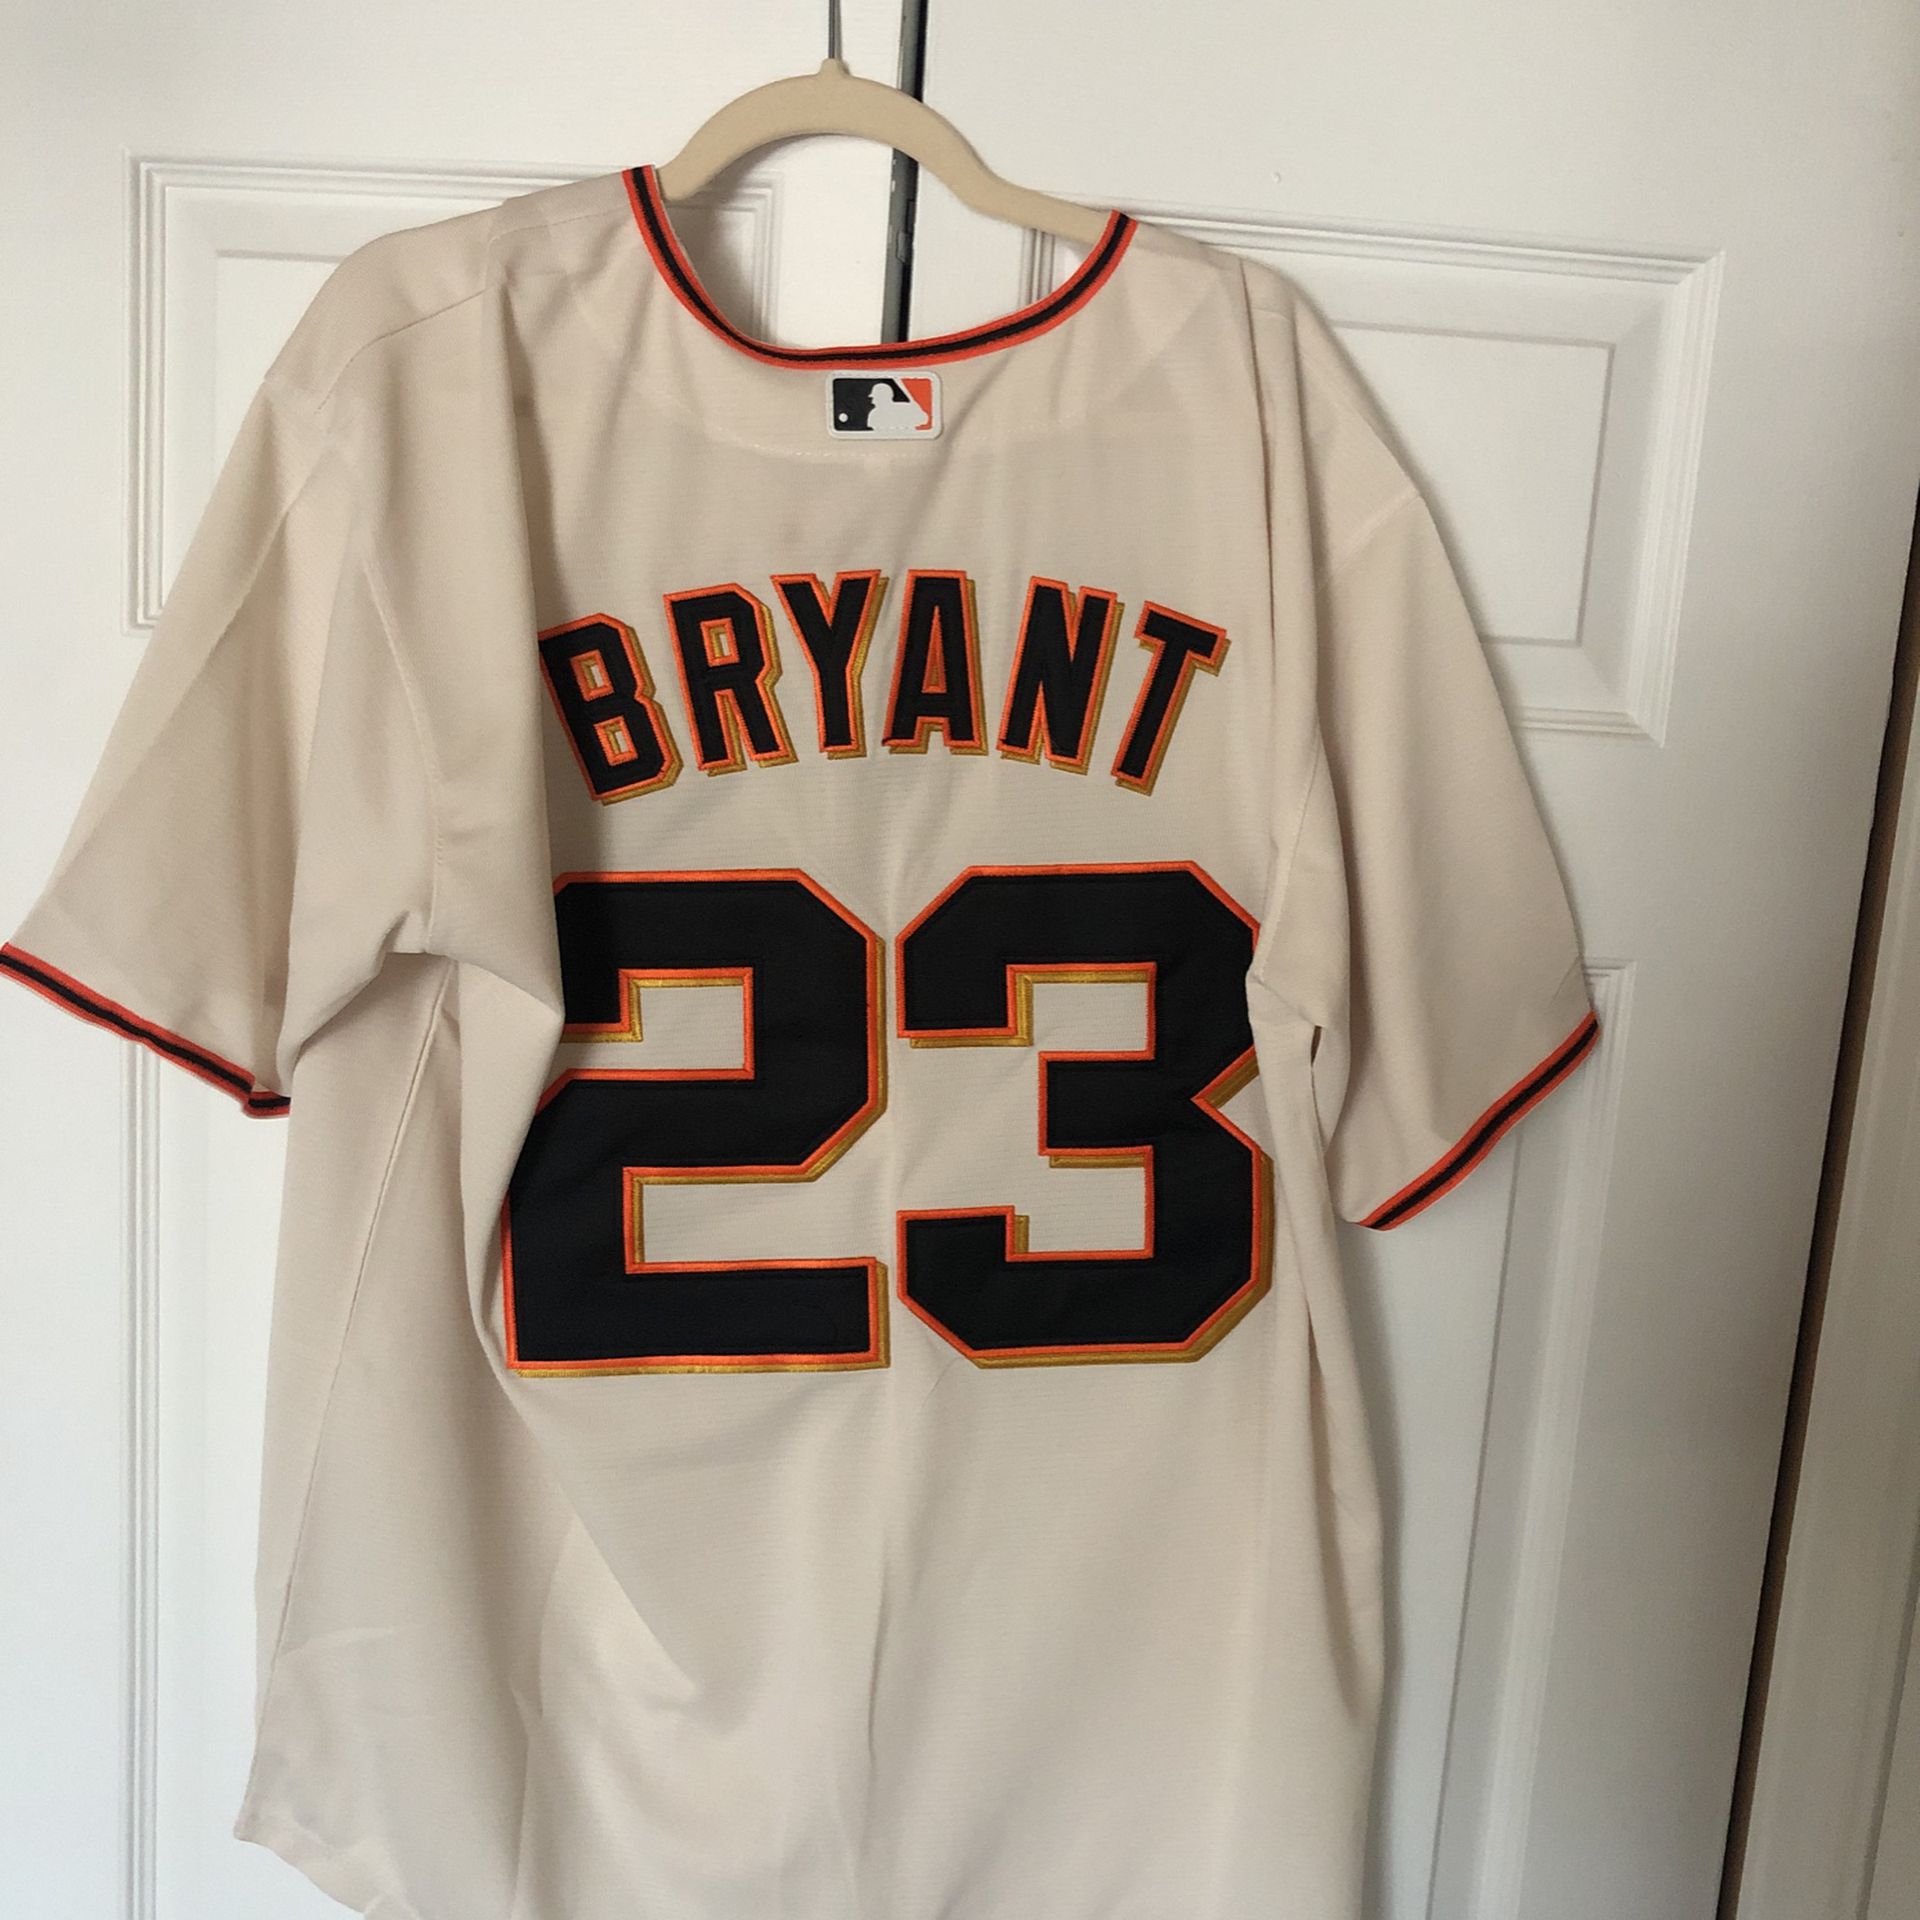 Kris Bryant - San Francisco Giants Jersey XL for Sale in Naperville